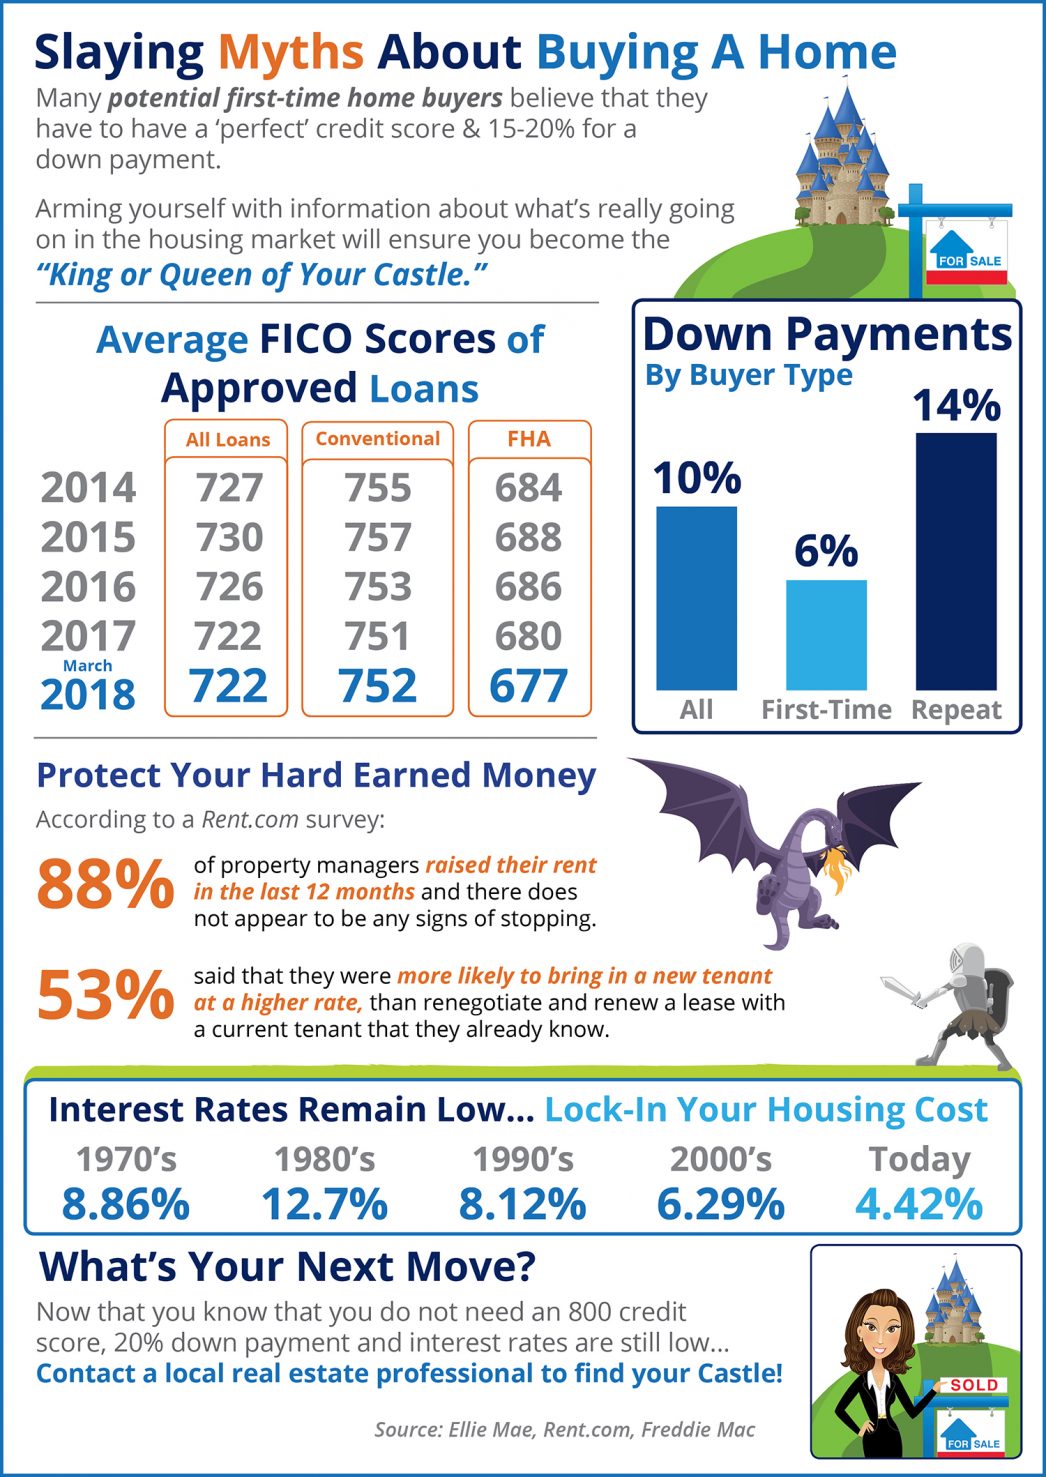 Home Buying Myths Slayed [INFOGRAPHIC] | MyKCM